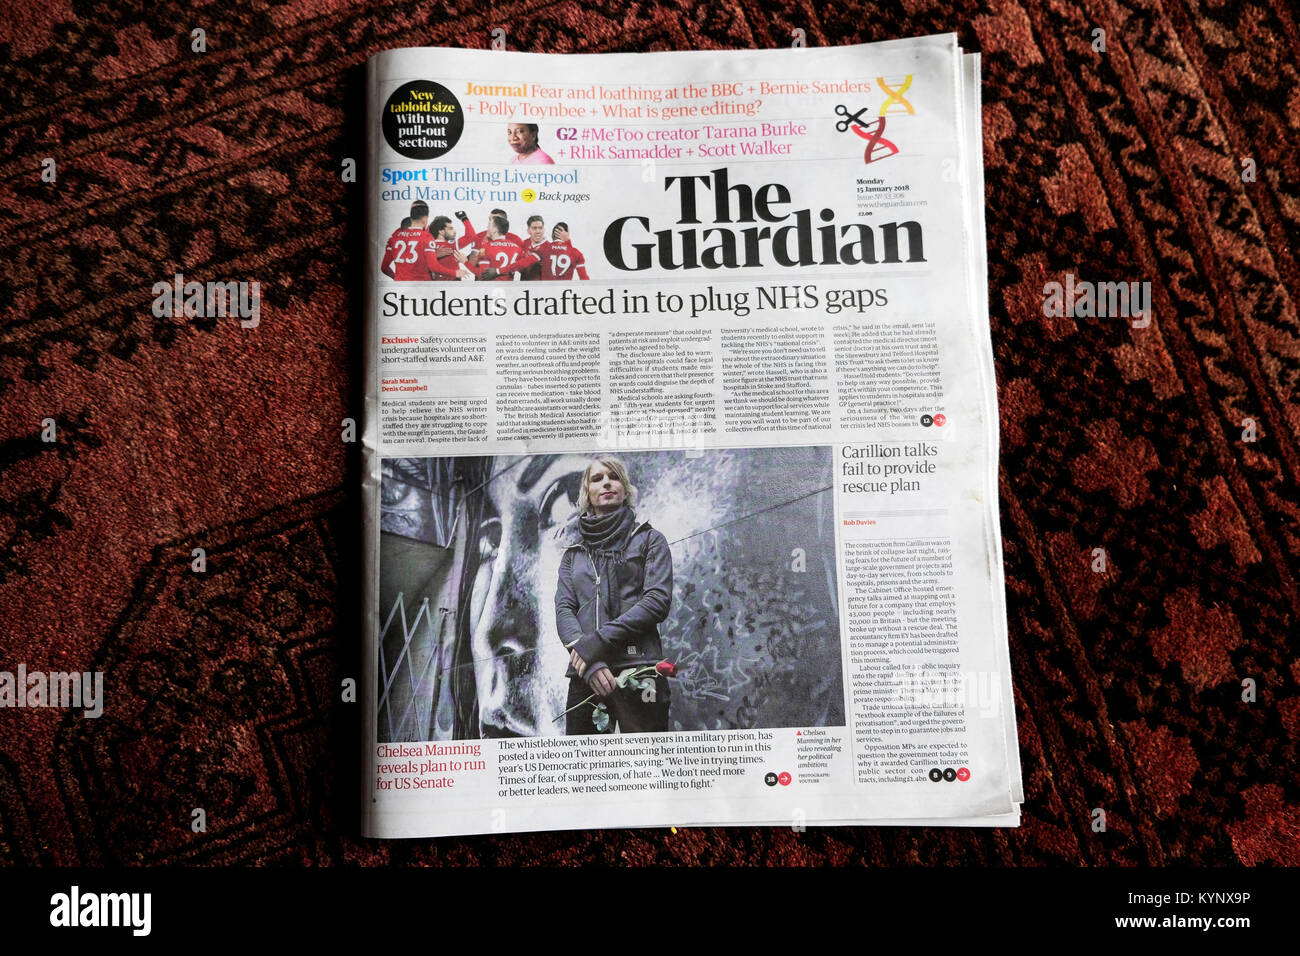 London, England UK, Monday 15 January 2018 UK Media. The Guardian newspaper today launches a smaller, simplified tabloid format of it's printed newspaper with a new logo and font entitled 'Guardian headline'. Also unveiled with the new print edition is a redesigned website for mobile, app and desktop readers. Credit: Kathy deWitt/Alamy Live News Stock Photo